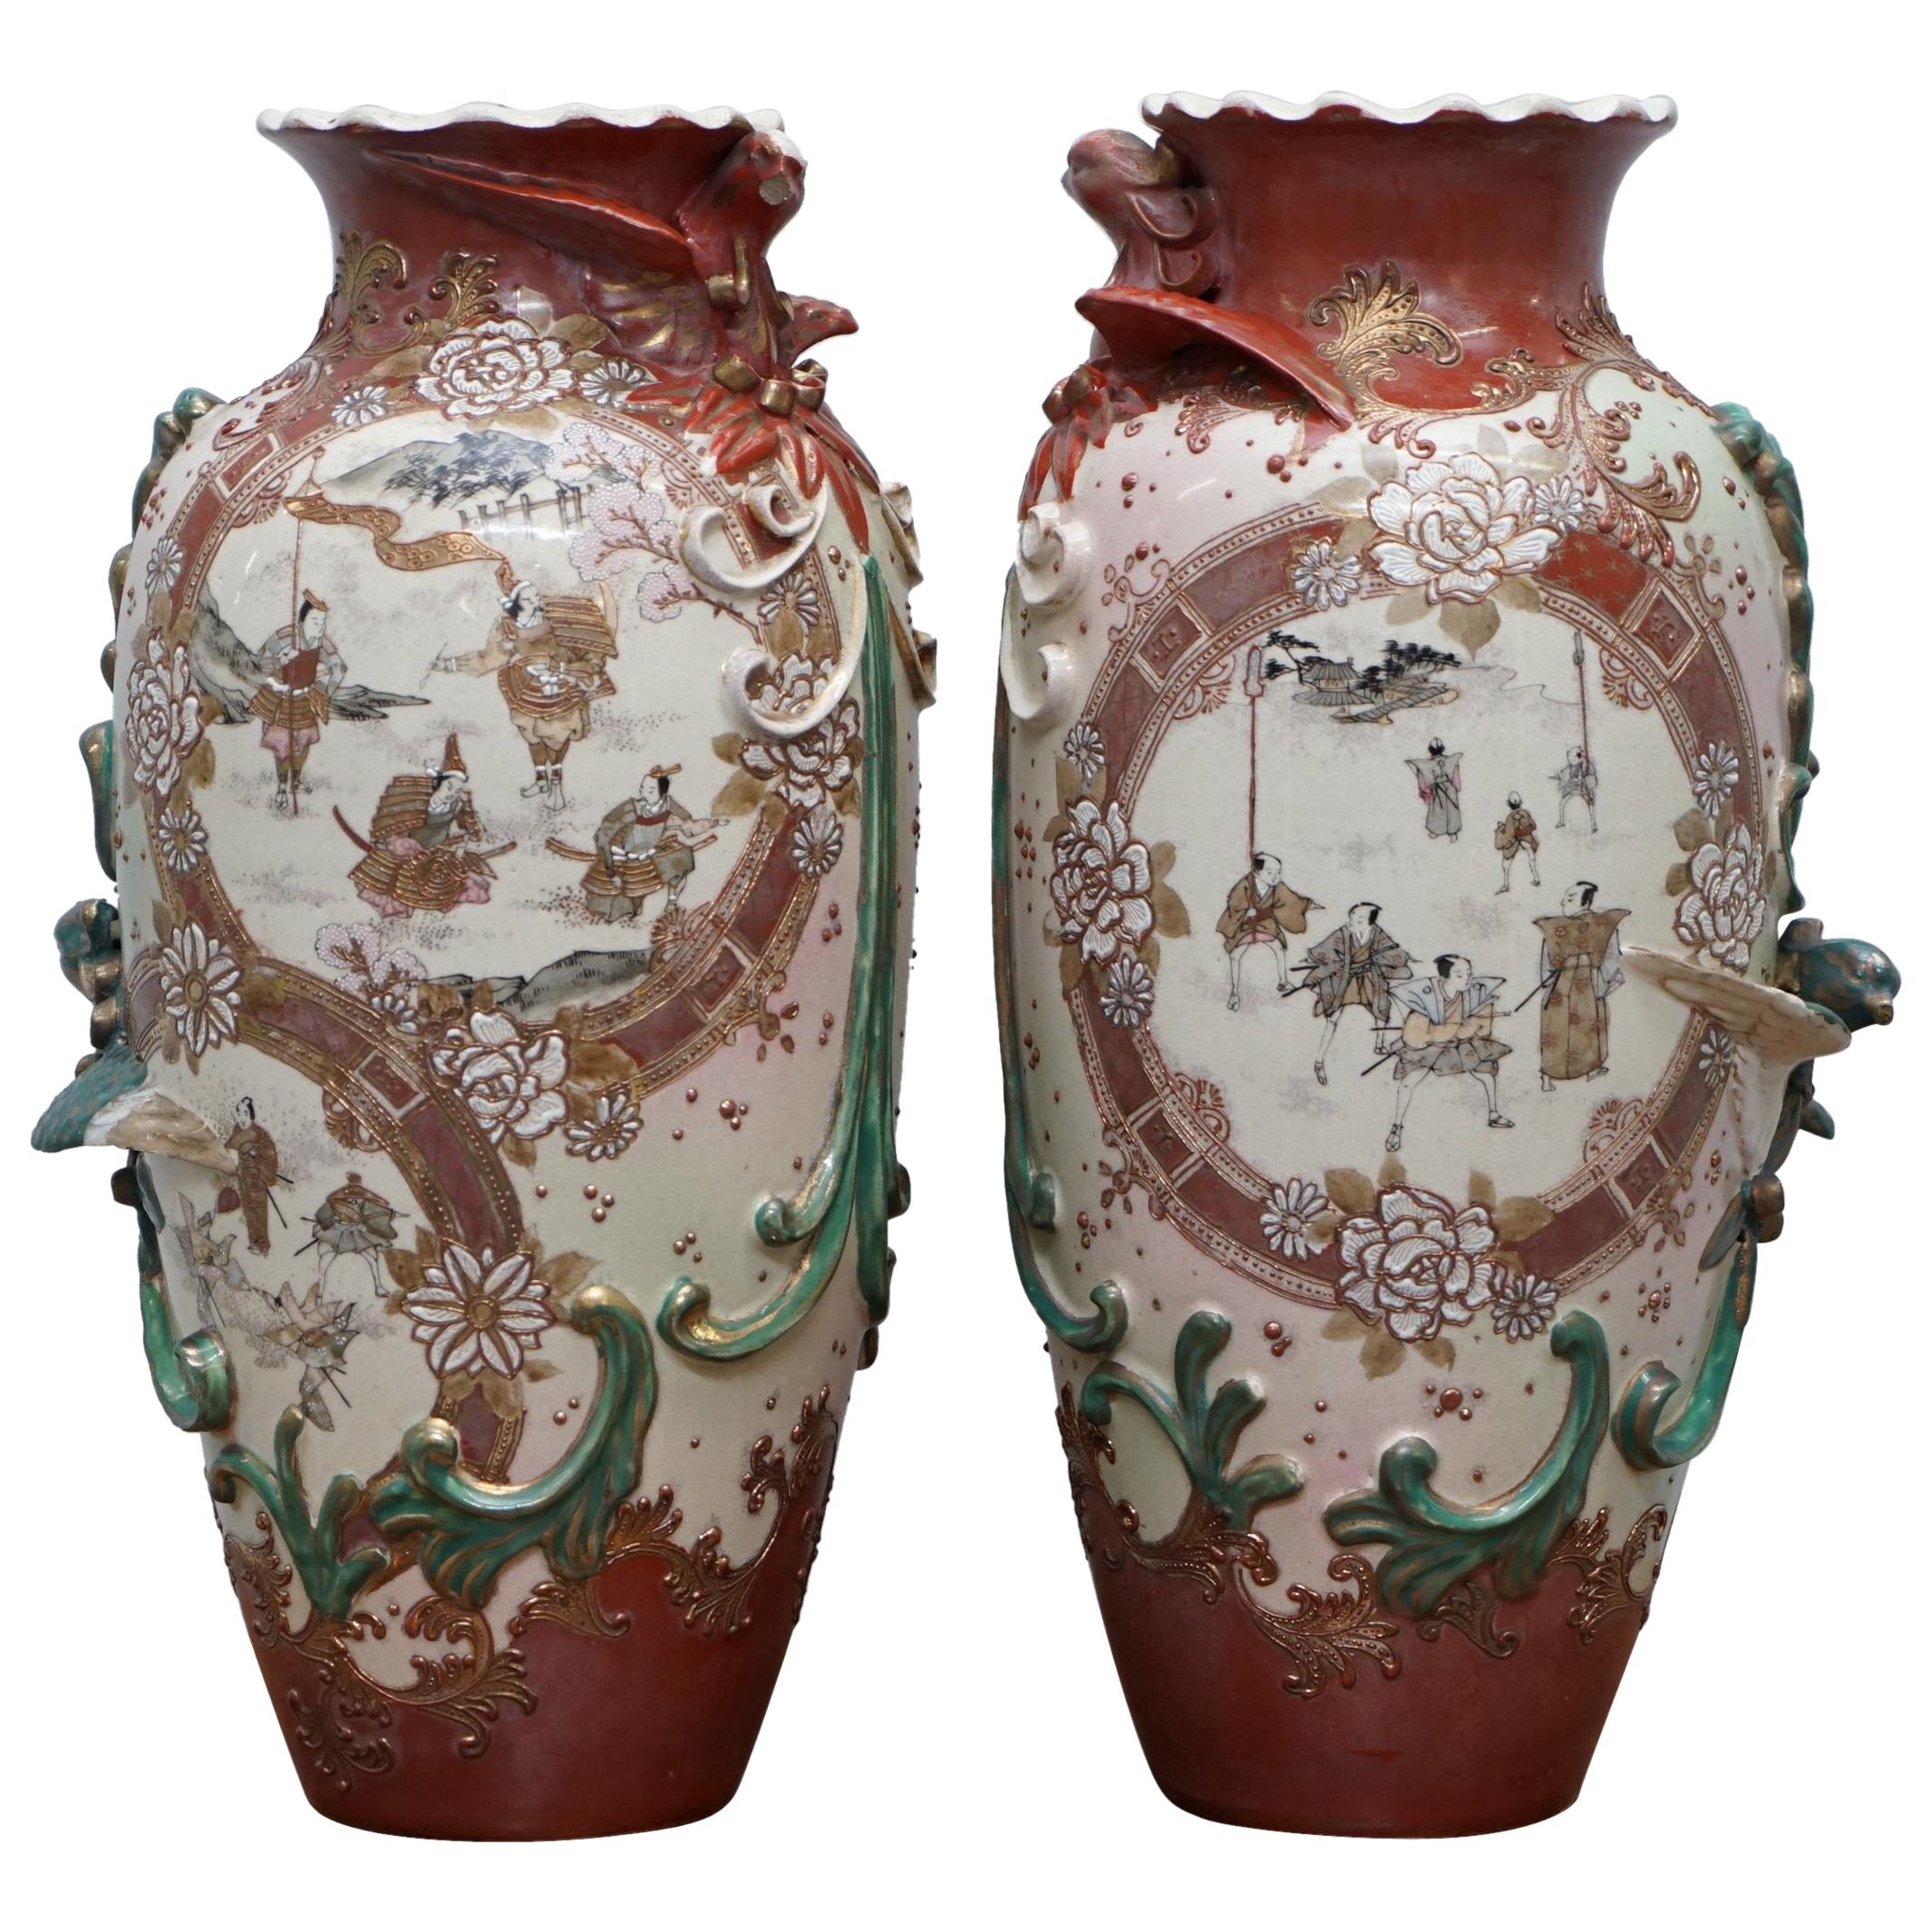 Pair of Signed Large Early 19th Century Chinese Vases Ornate Designs